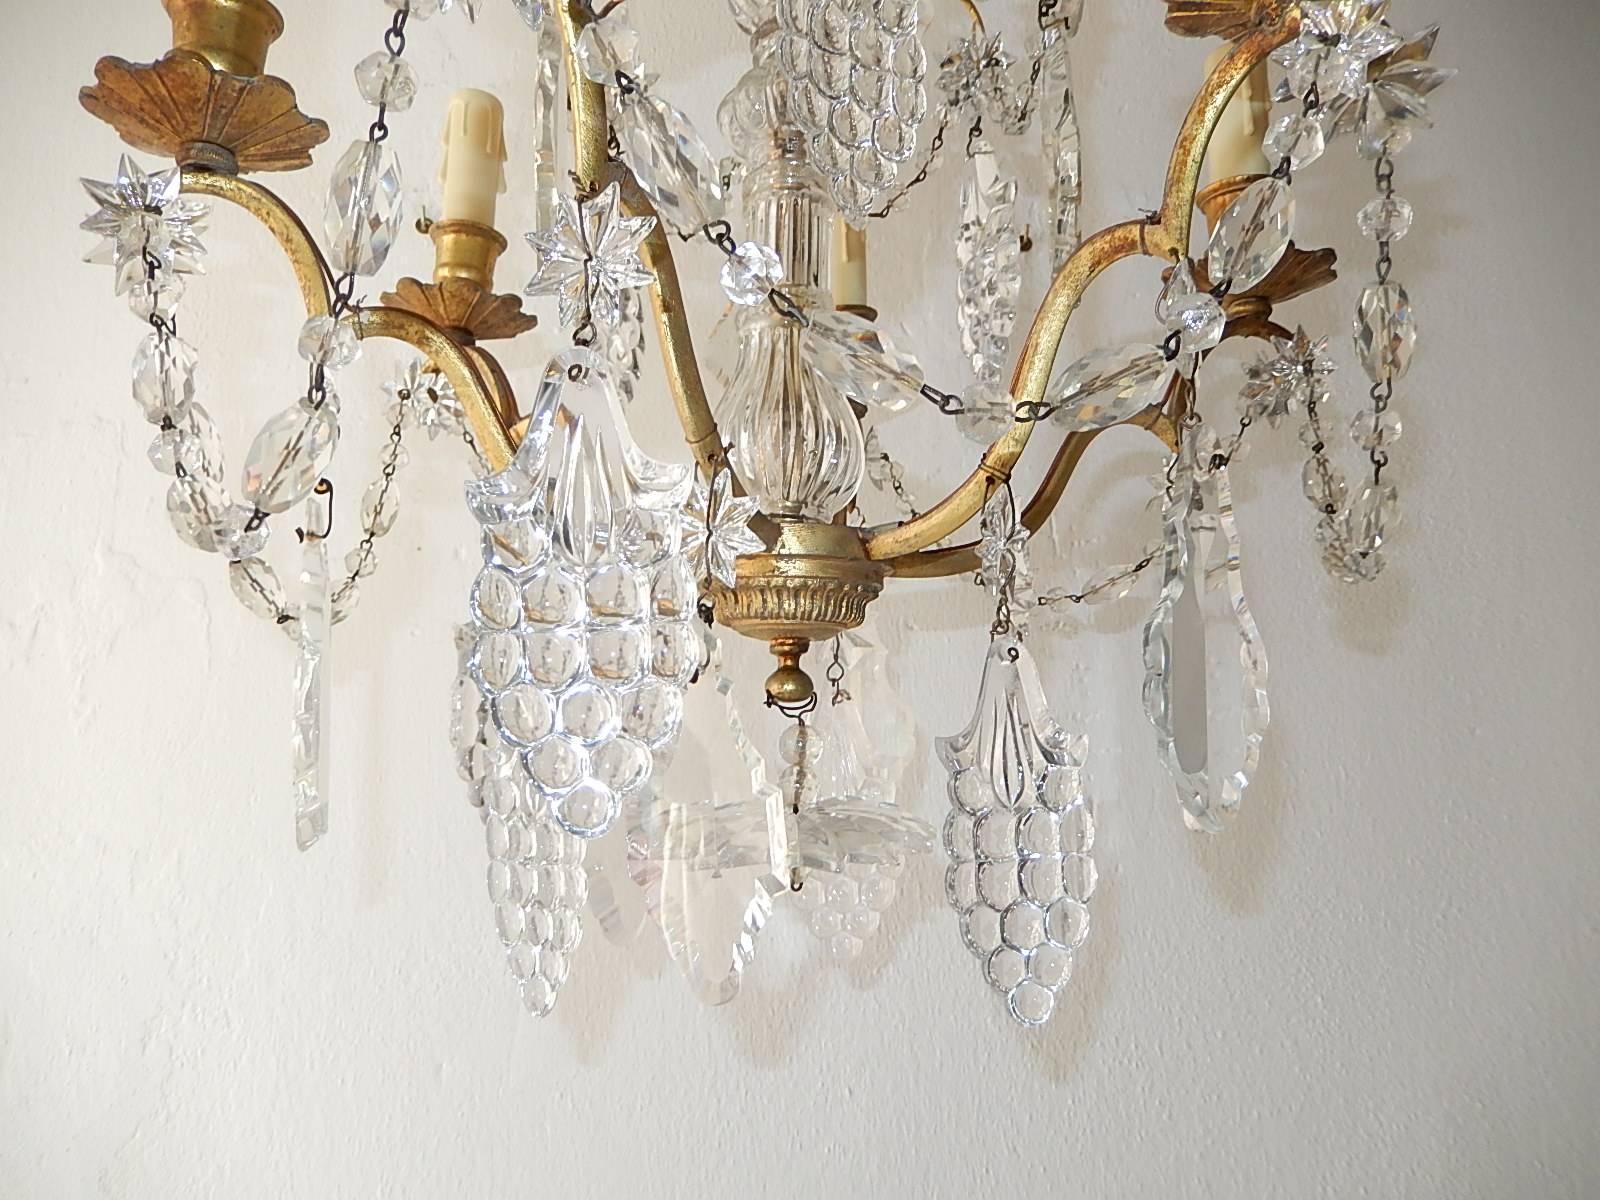 Housing six lights, star prisms throughout with crystal prisms and rare grape cluster prisms. Blown glass centre. Huge star as finial. Re-wired and ready to hang. Adding 6 inches of original chain and canopy. Free priority shipping from Italy.